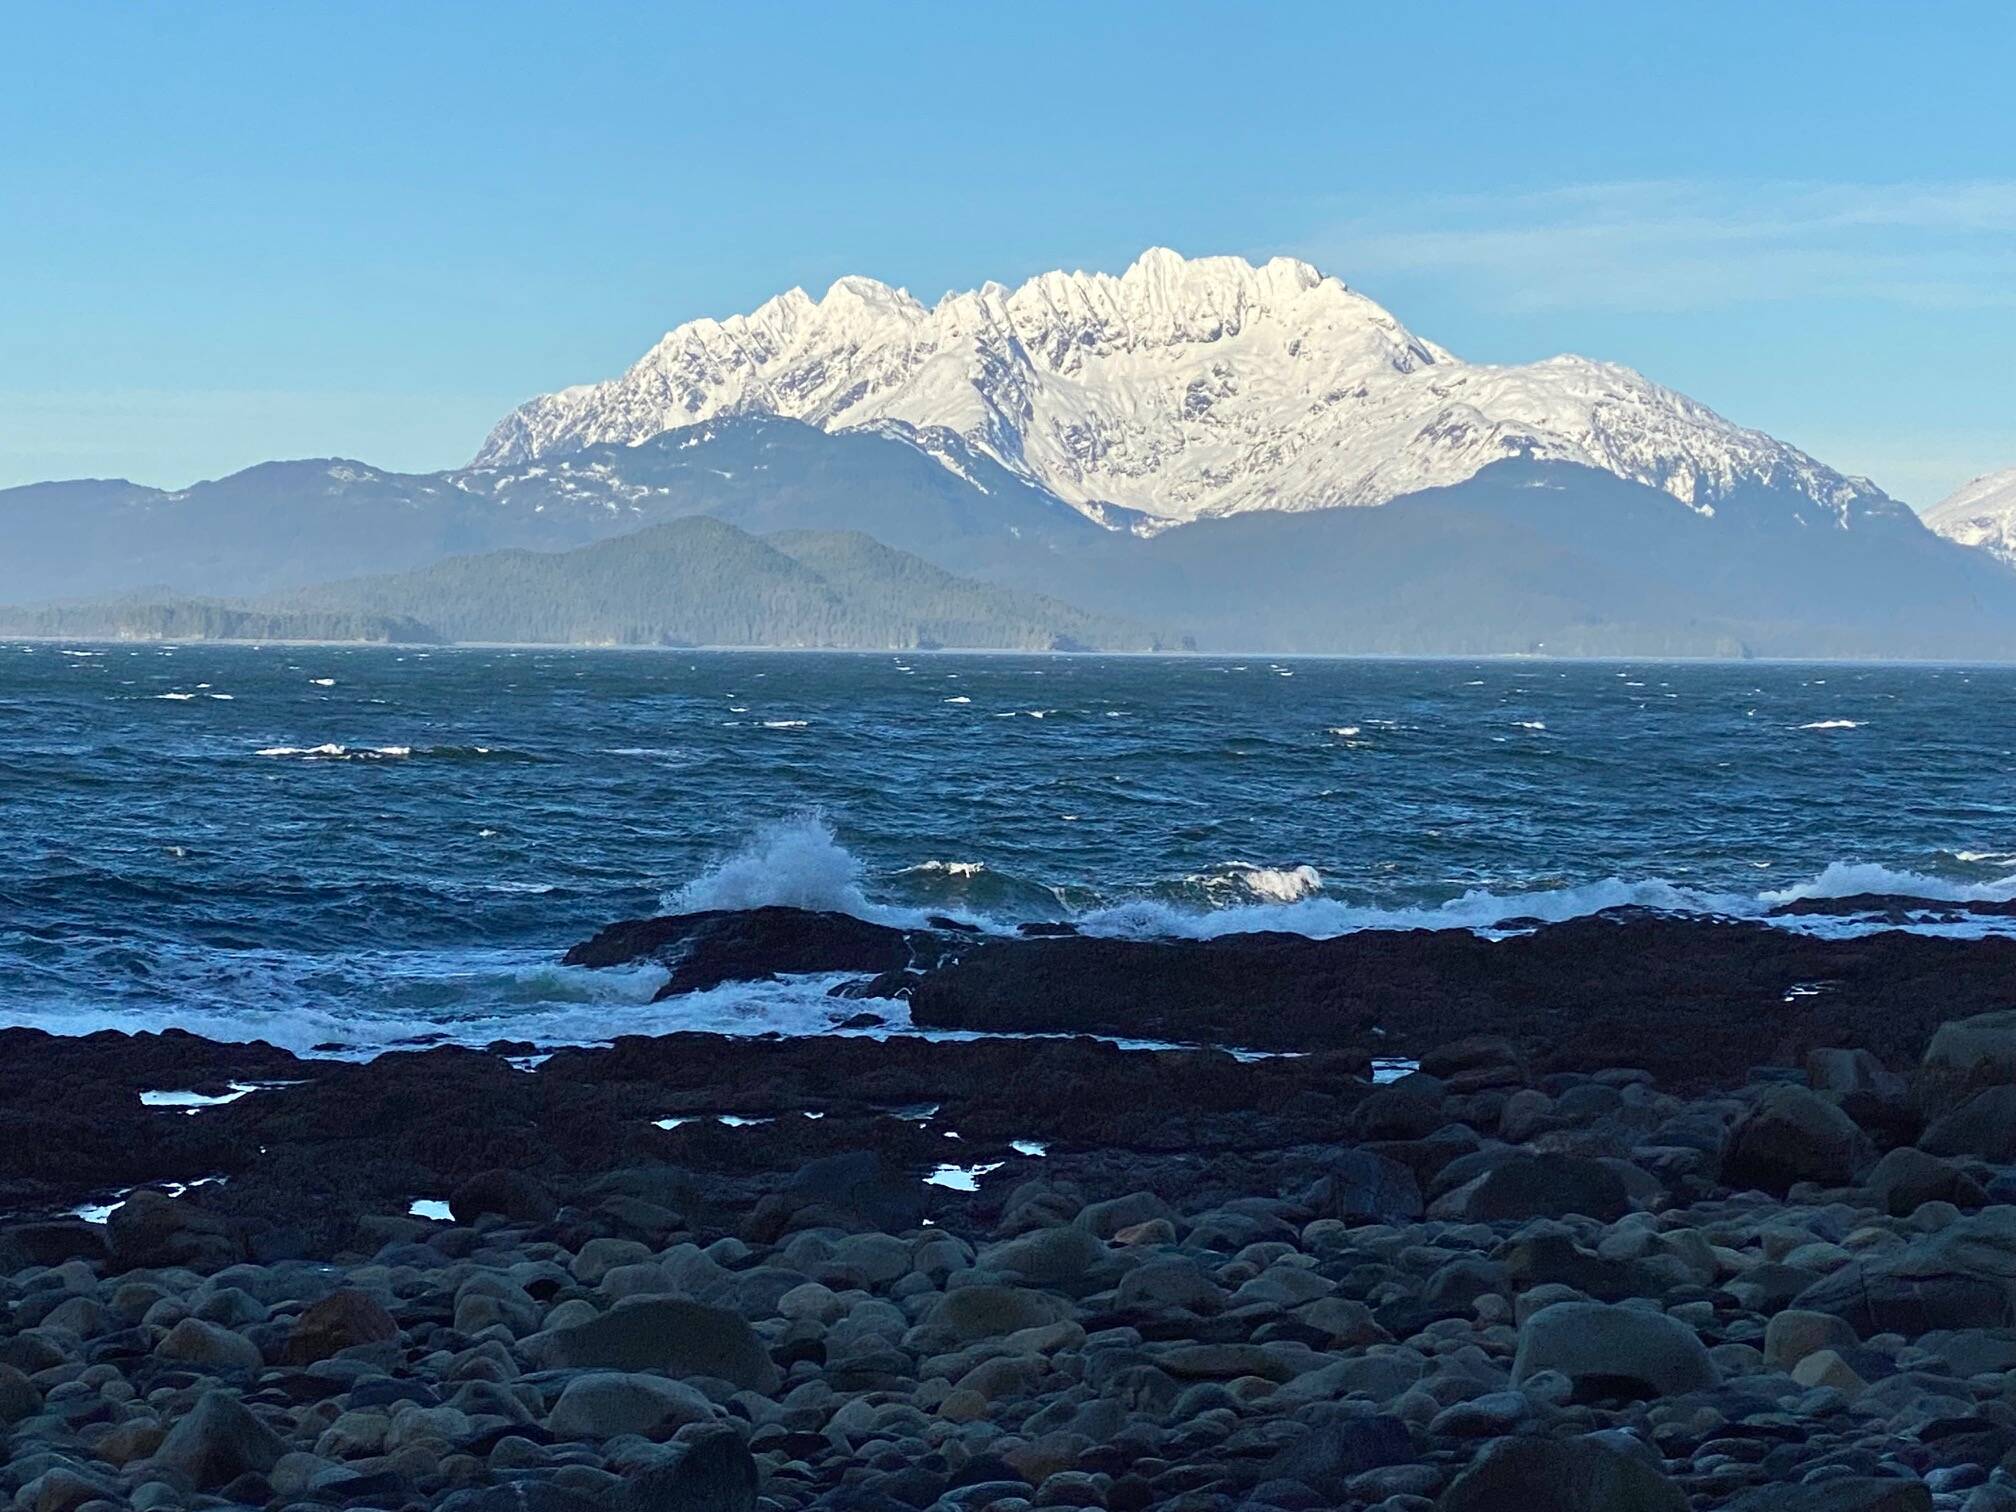 Crashing surf and Lion’s Head mountain seen from Blue Mussel beach on Nov. 16. (Courtesy Photo / Denise Carroll)